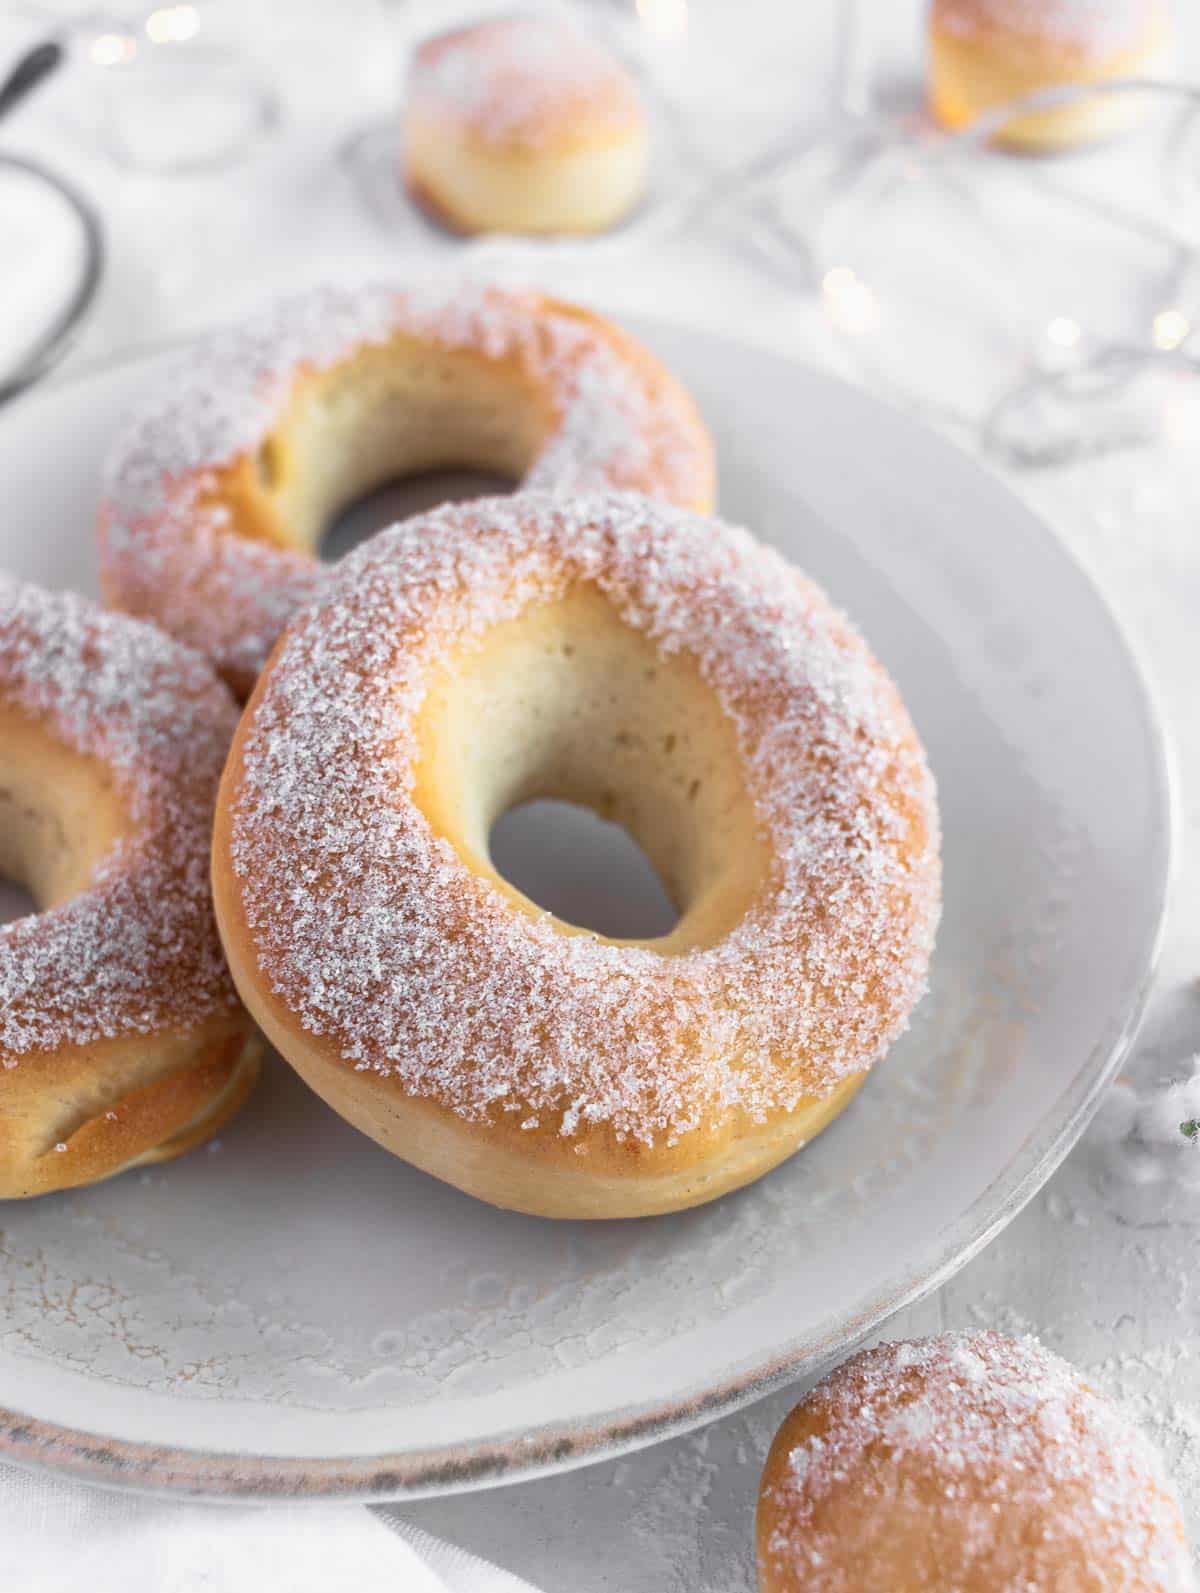 oven baked donuts